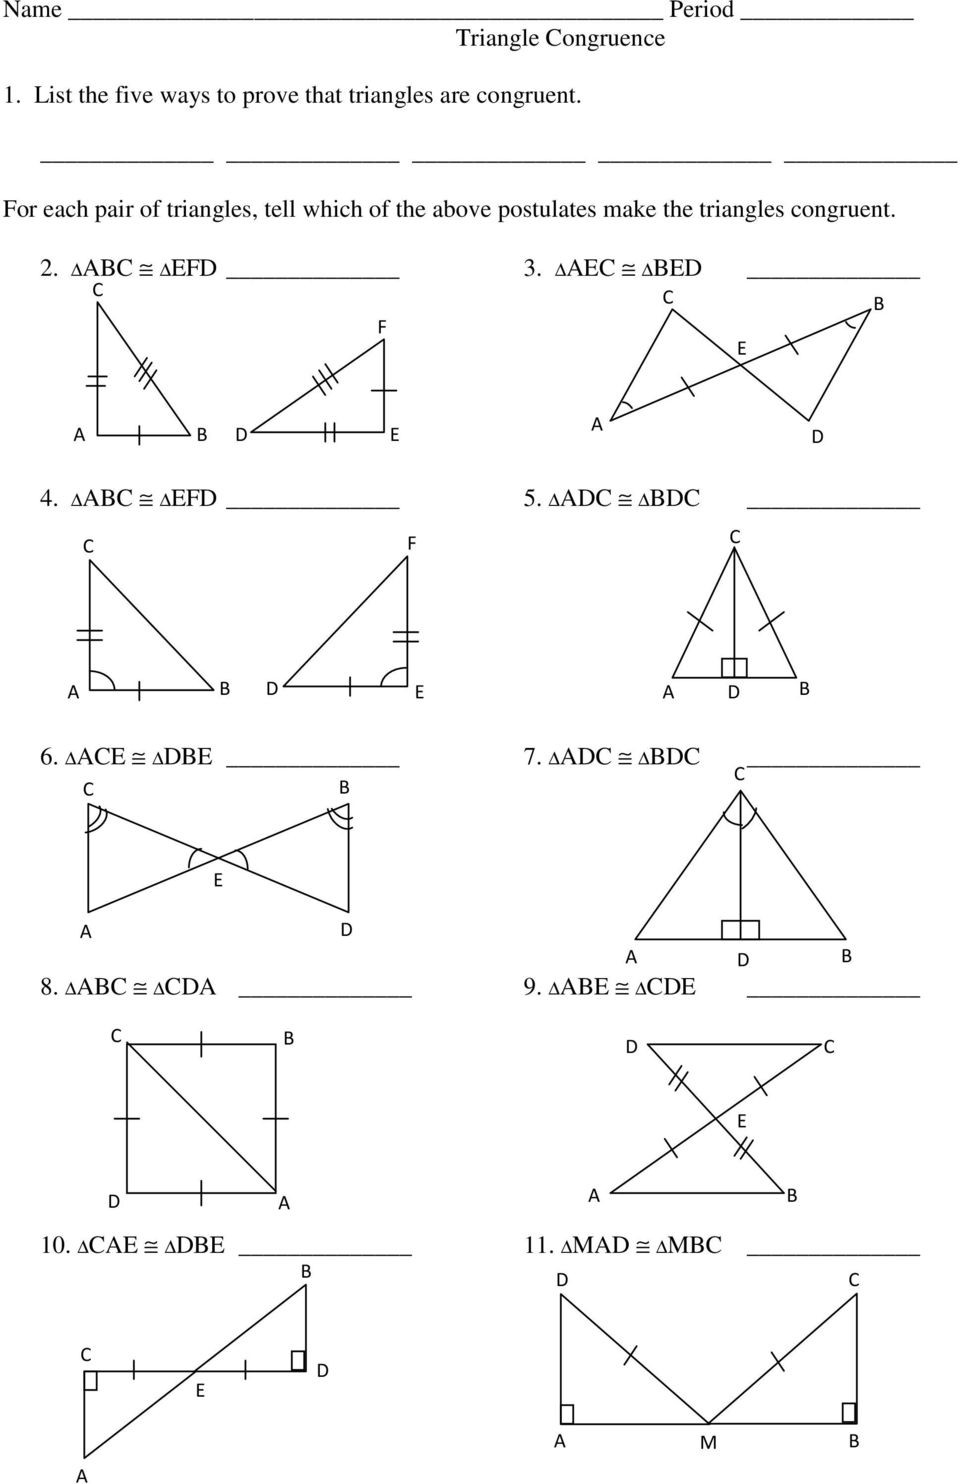 Proving Triangles Congruent Worksheet Name Period 11 2 11 13 Pdf Free Download